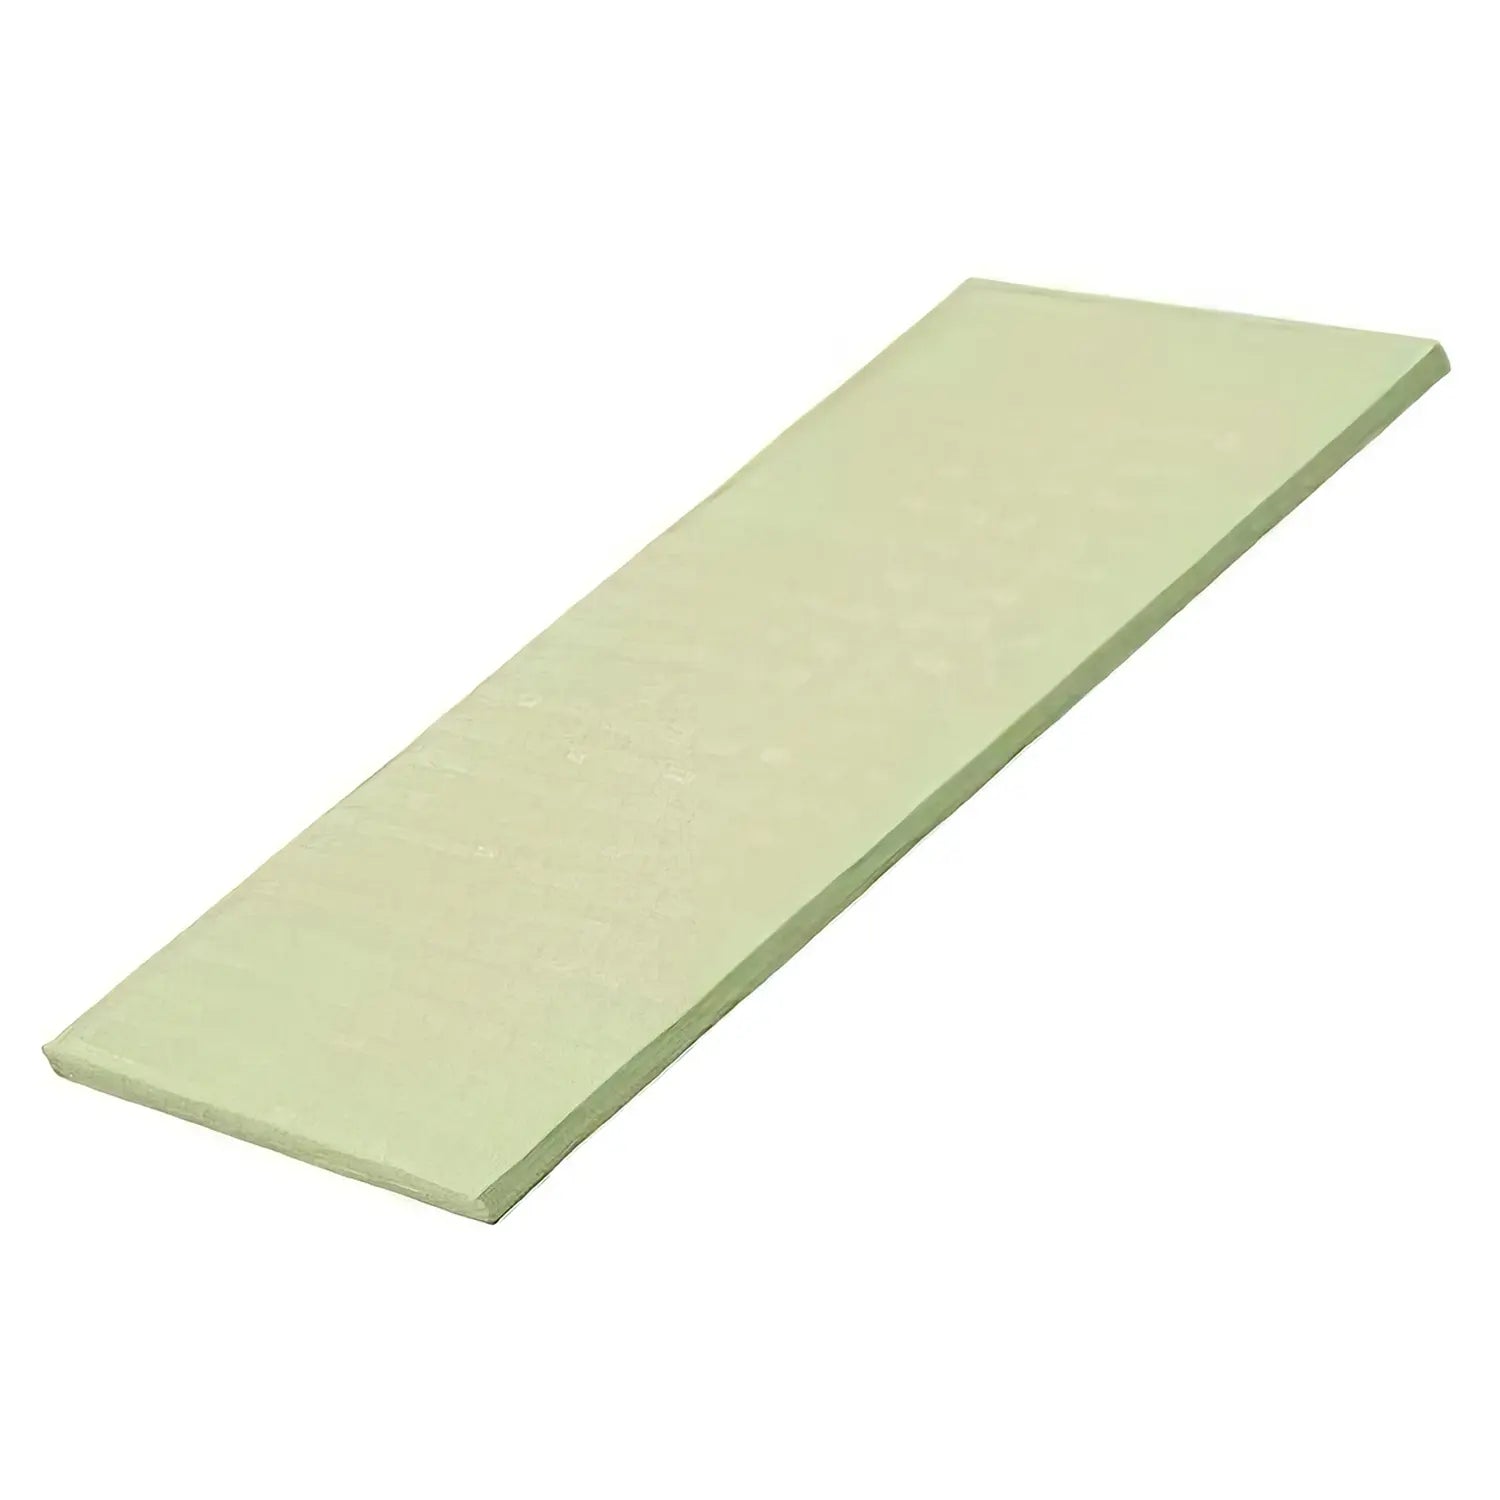 Asahi CookinCut - Synthetic Rubber Cutting Board for Professional